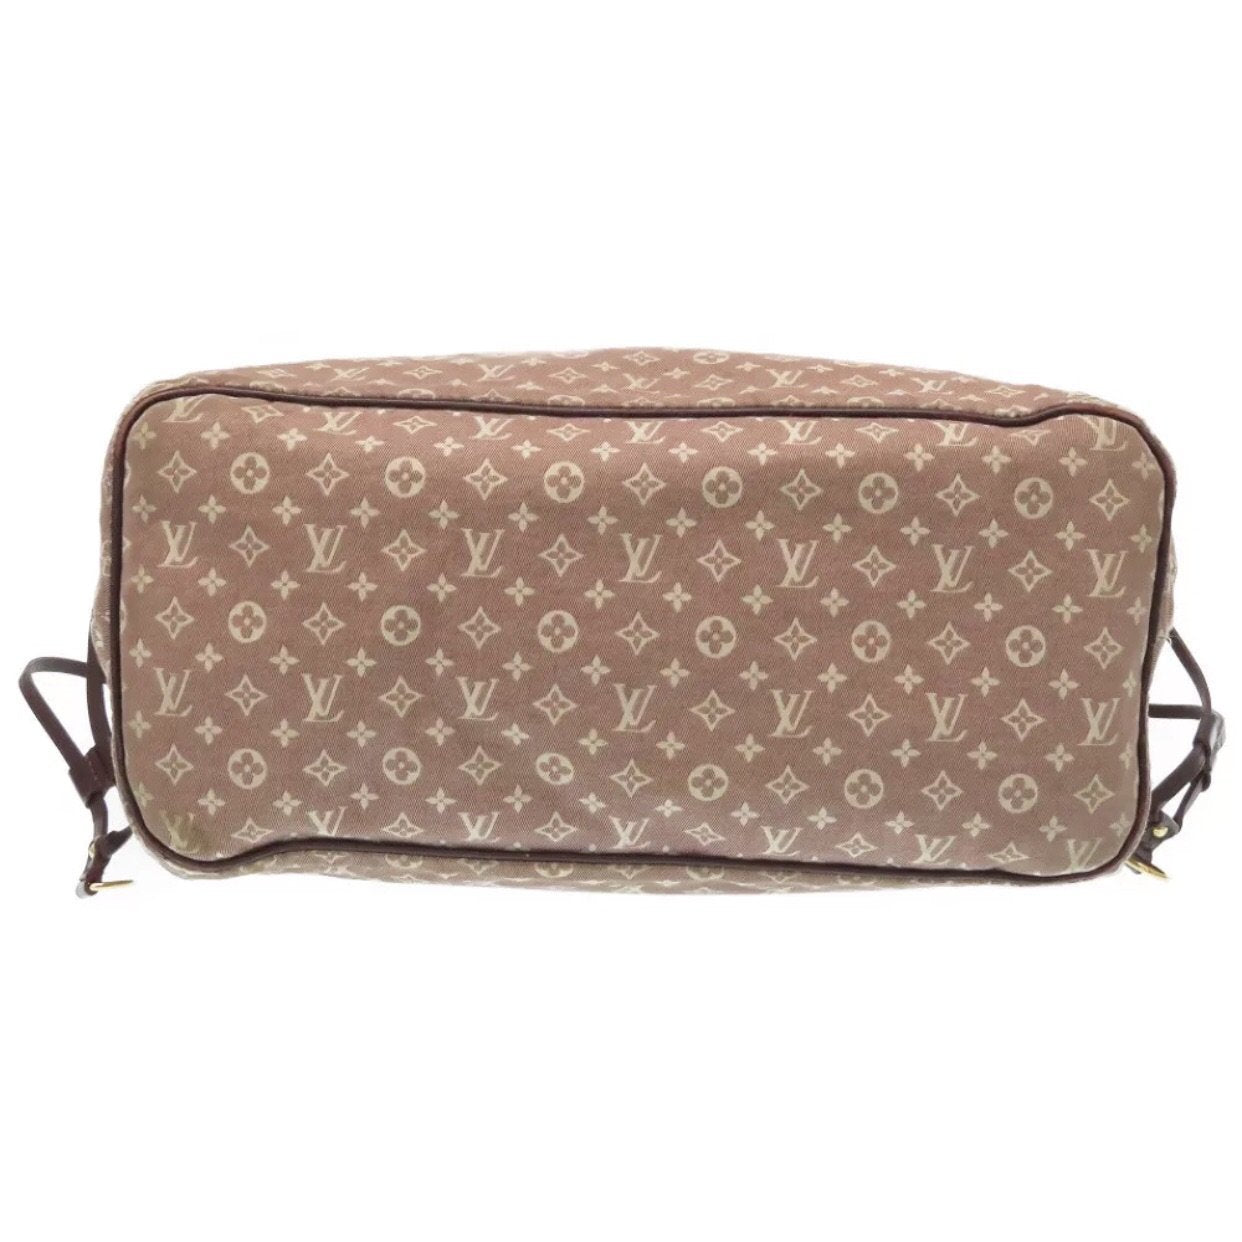 Louis Vuitton, Bags, Louis Vuitton Since 854 Neverfull Mm With Pouch